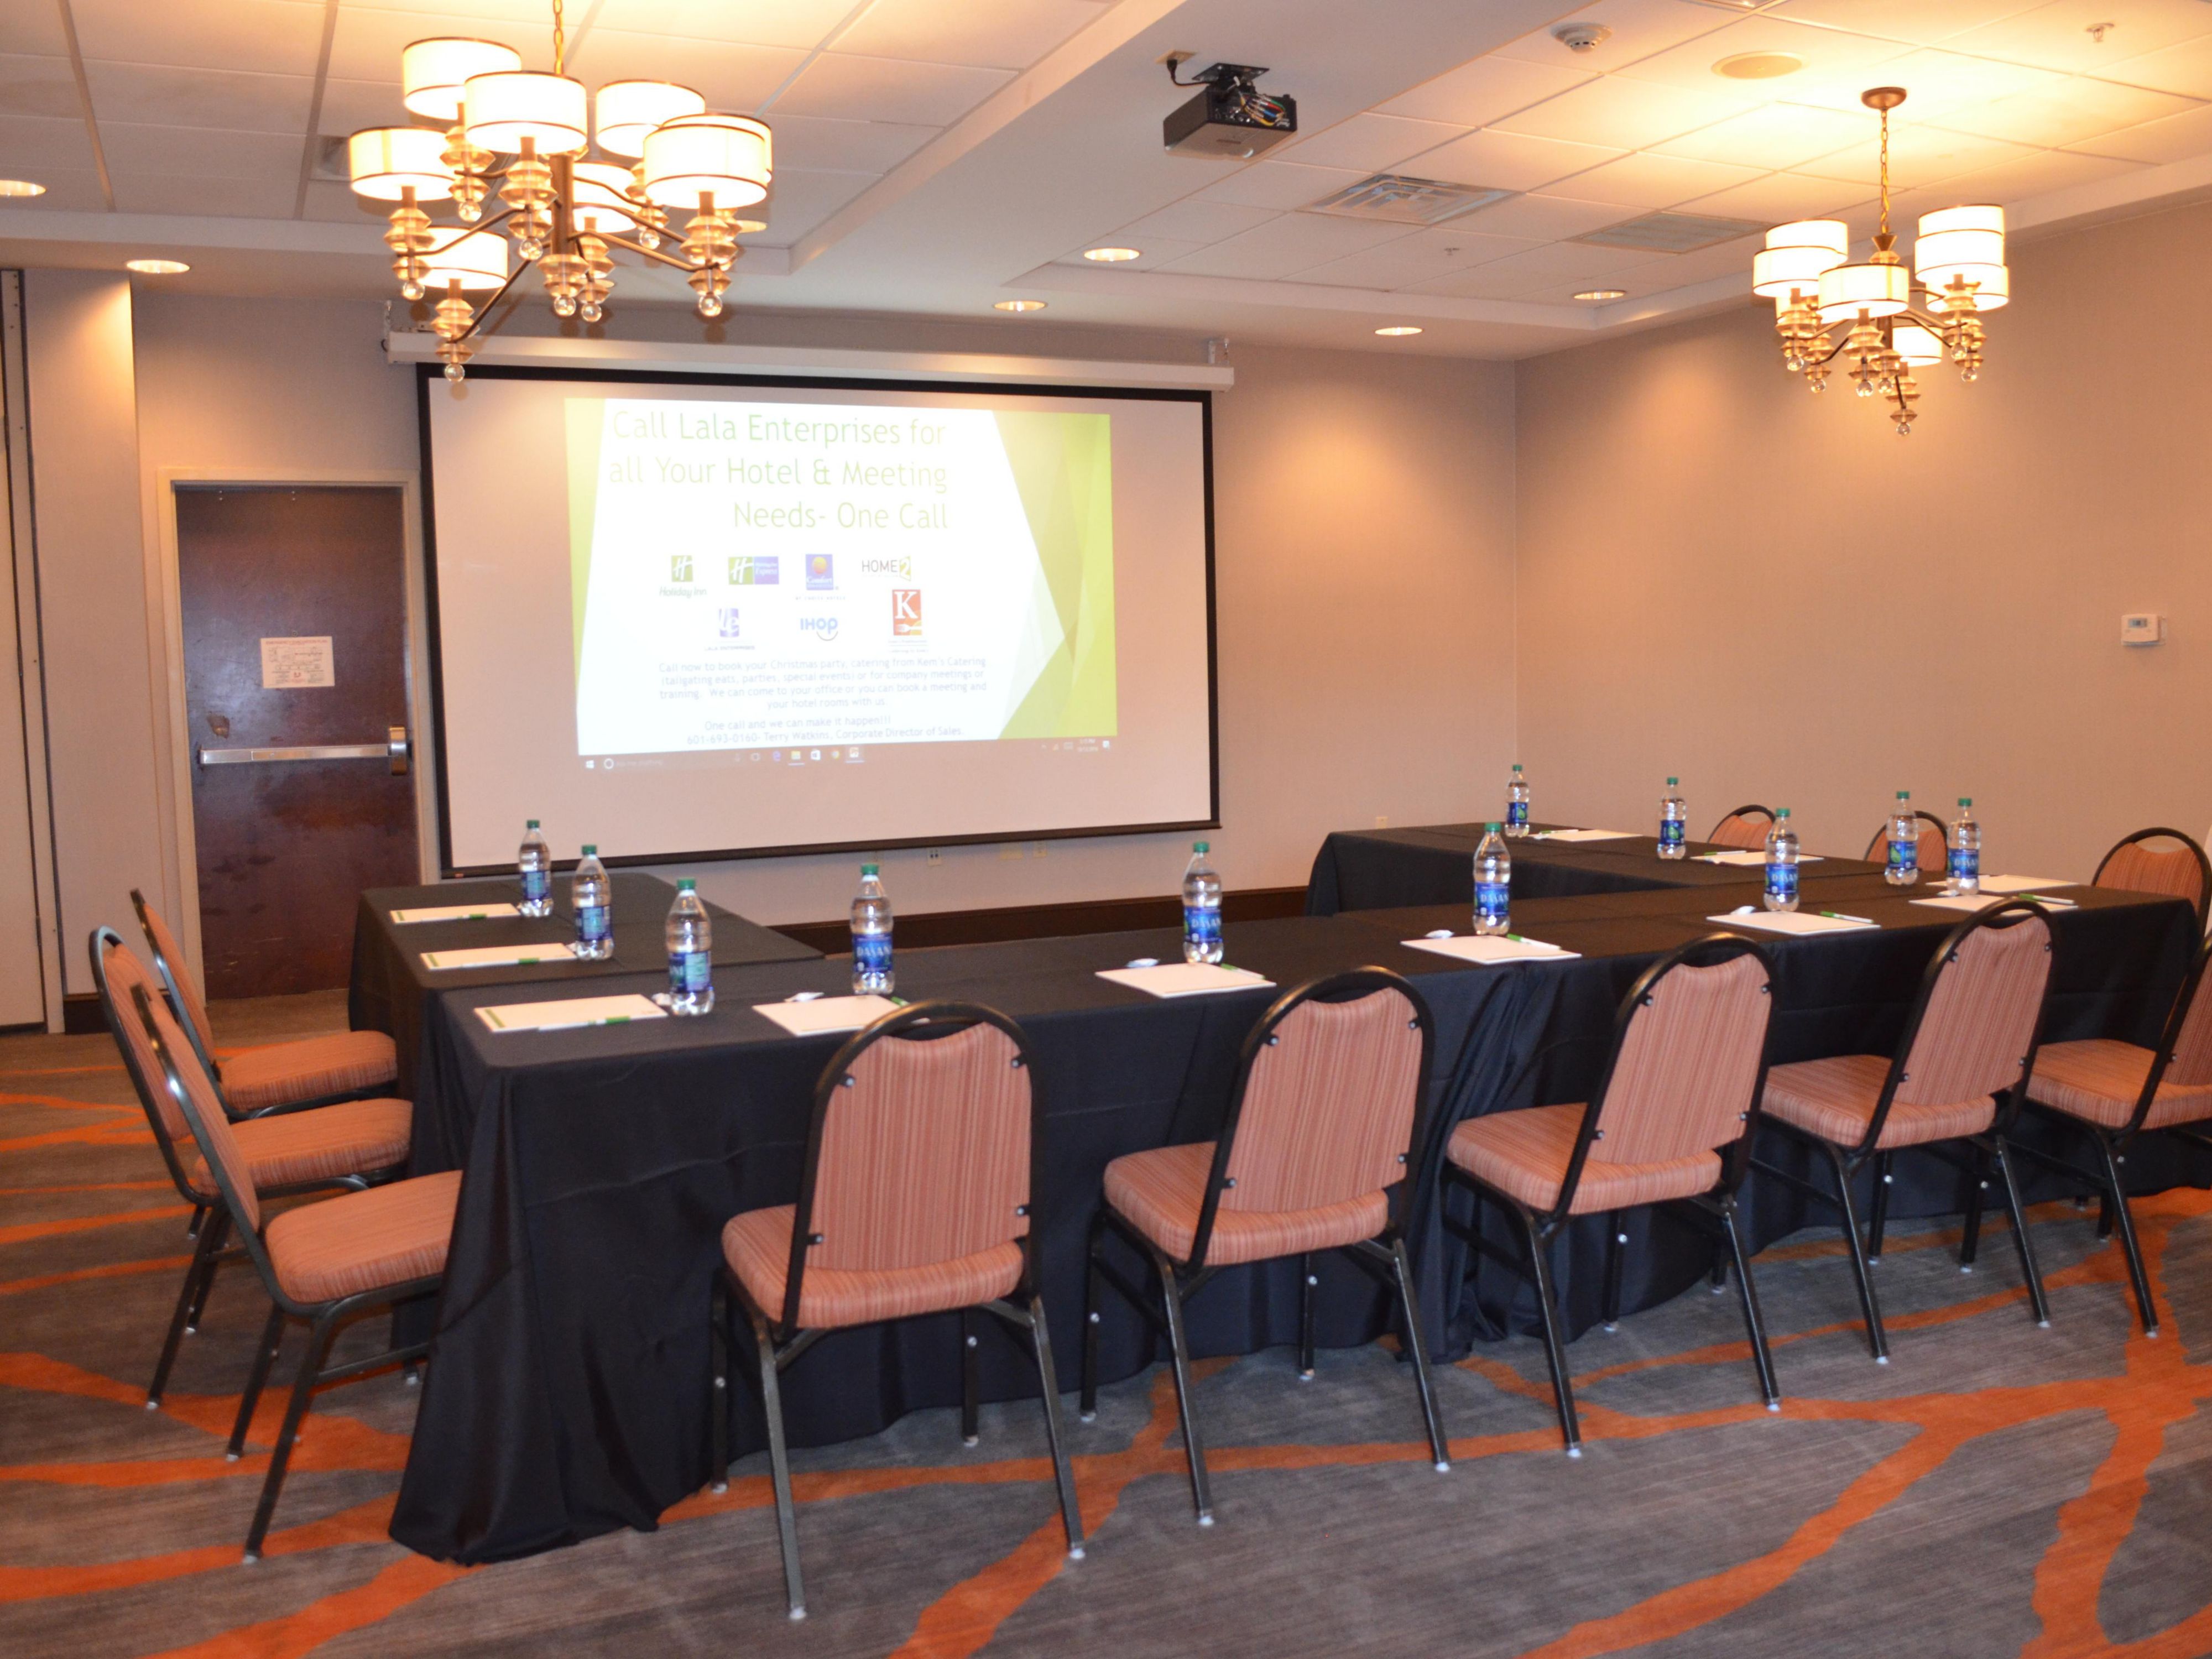 From business meetings, to weddings and family reunions, being together matters. With flexible meeting space, we make sure events of all sizes and types are a success. 
